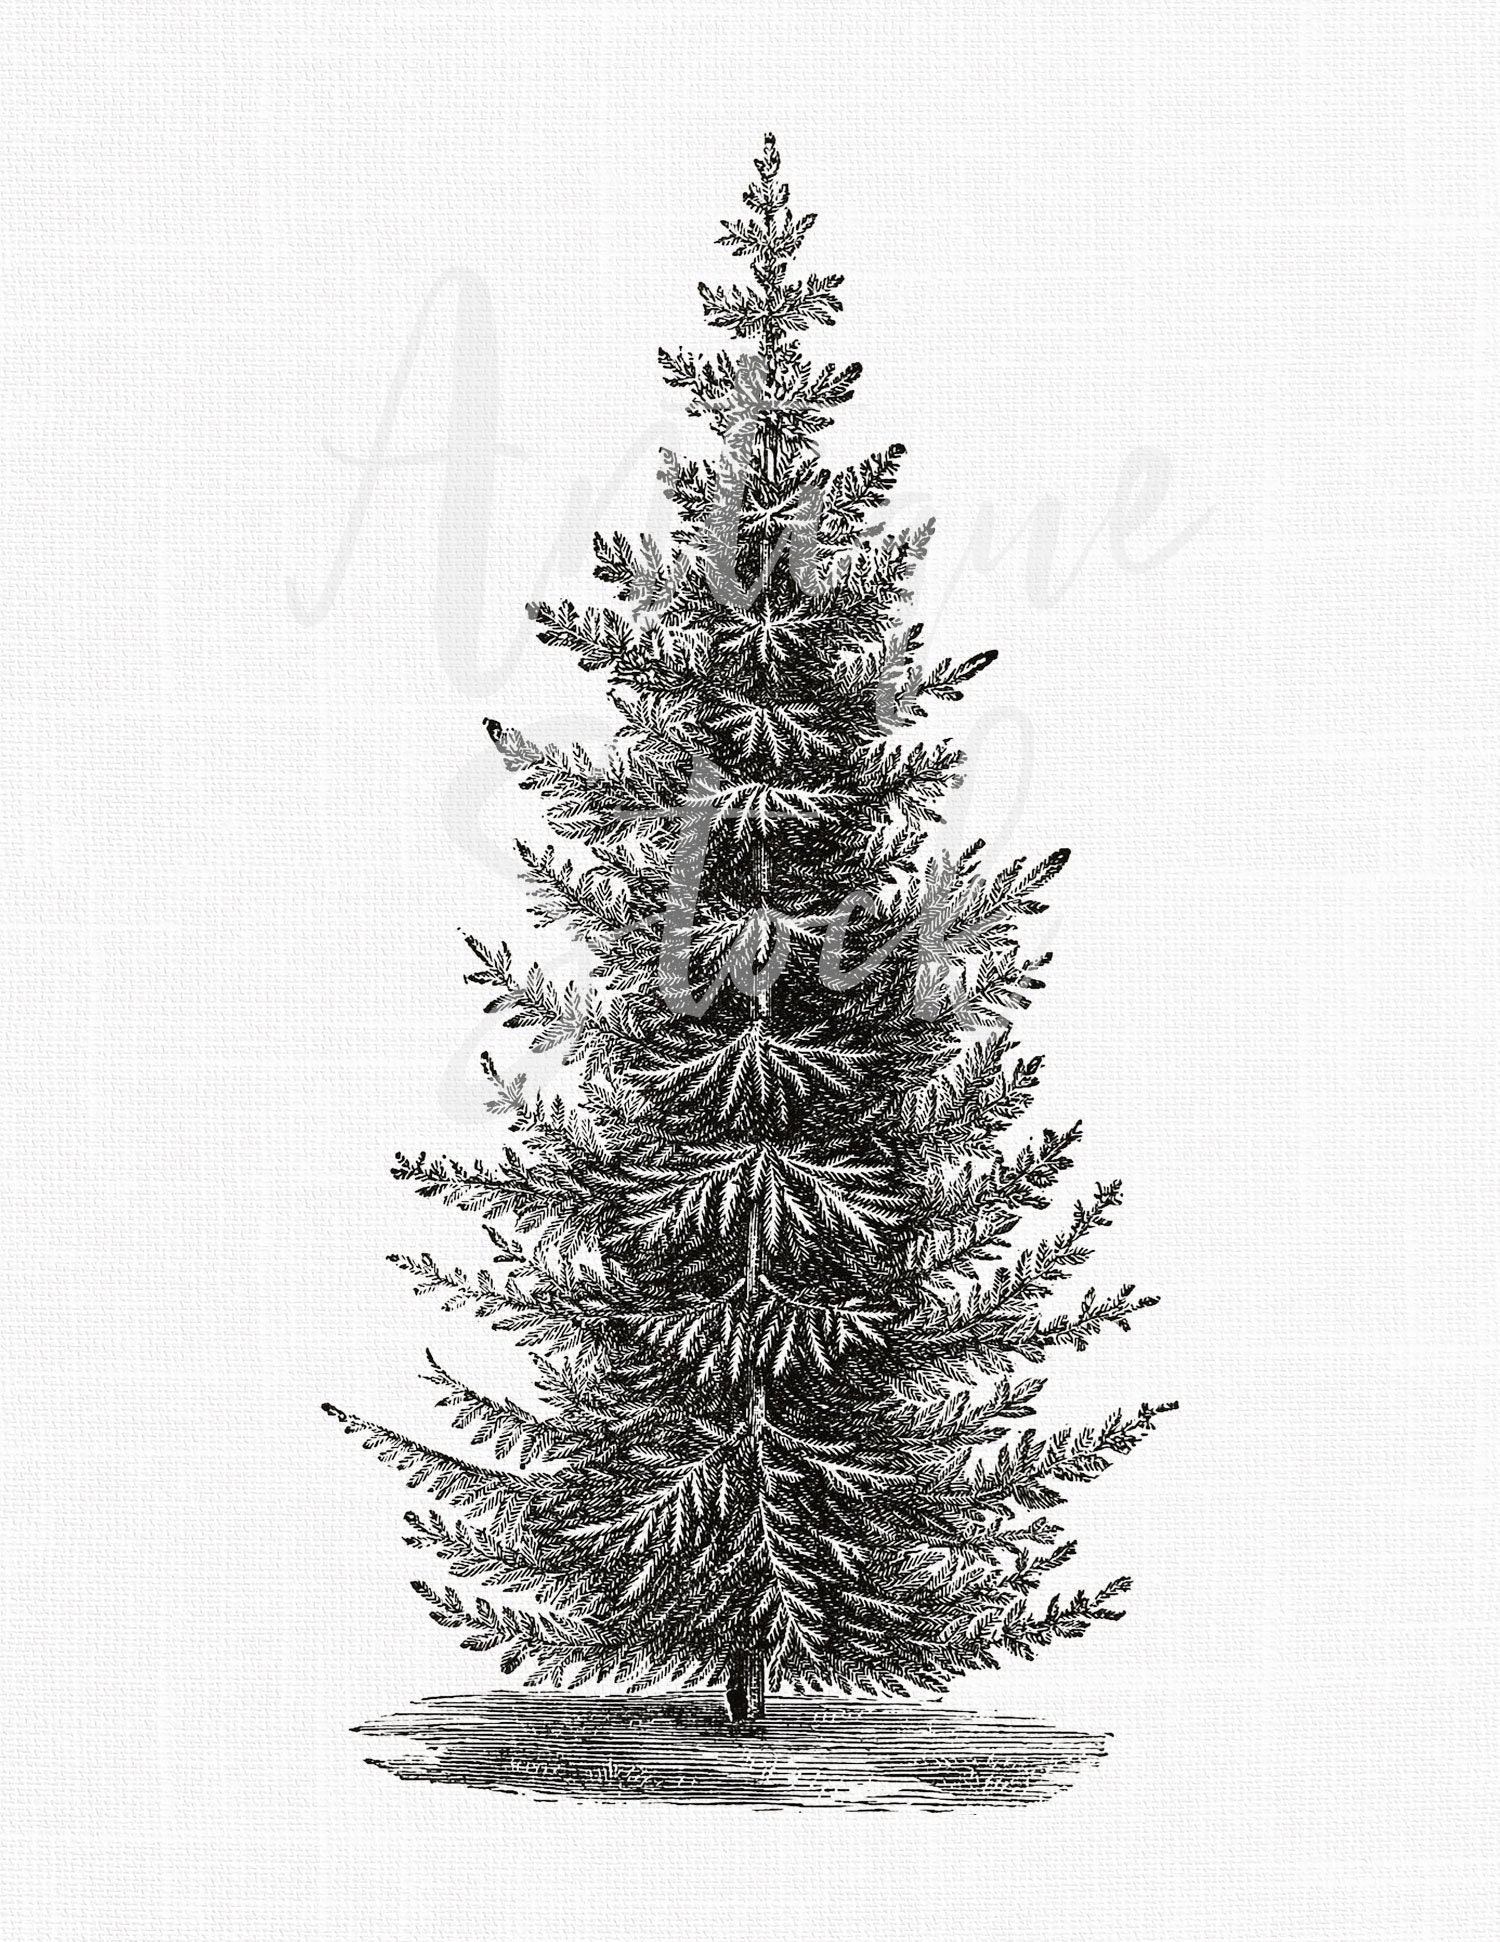 60565 Spruce Tree Drawing Images Stock Photos  Vectors  Shutterstock